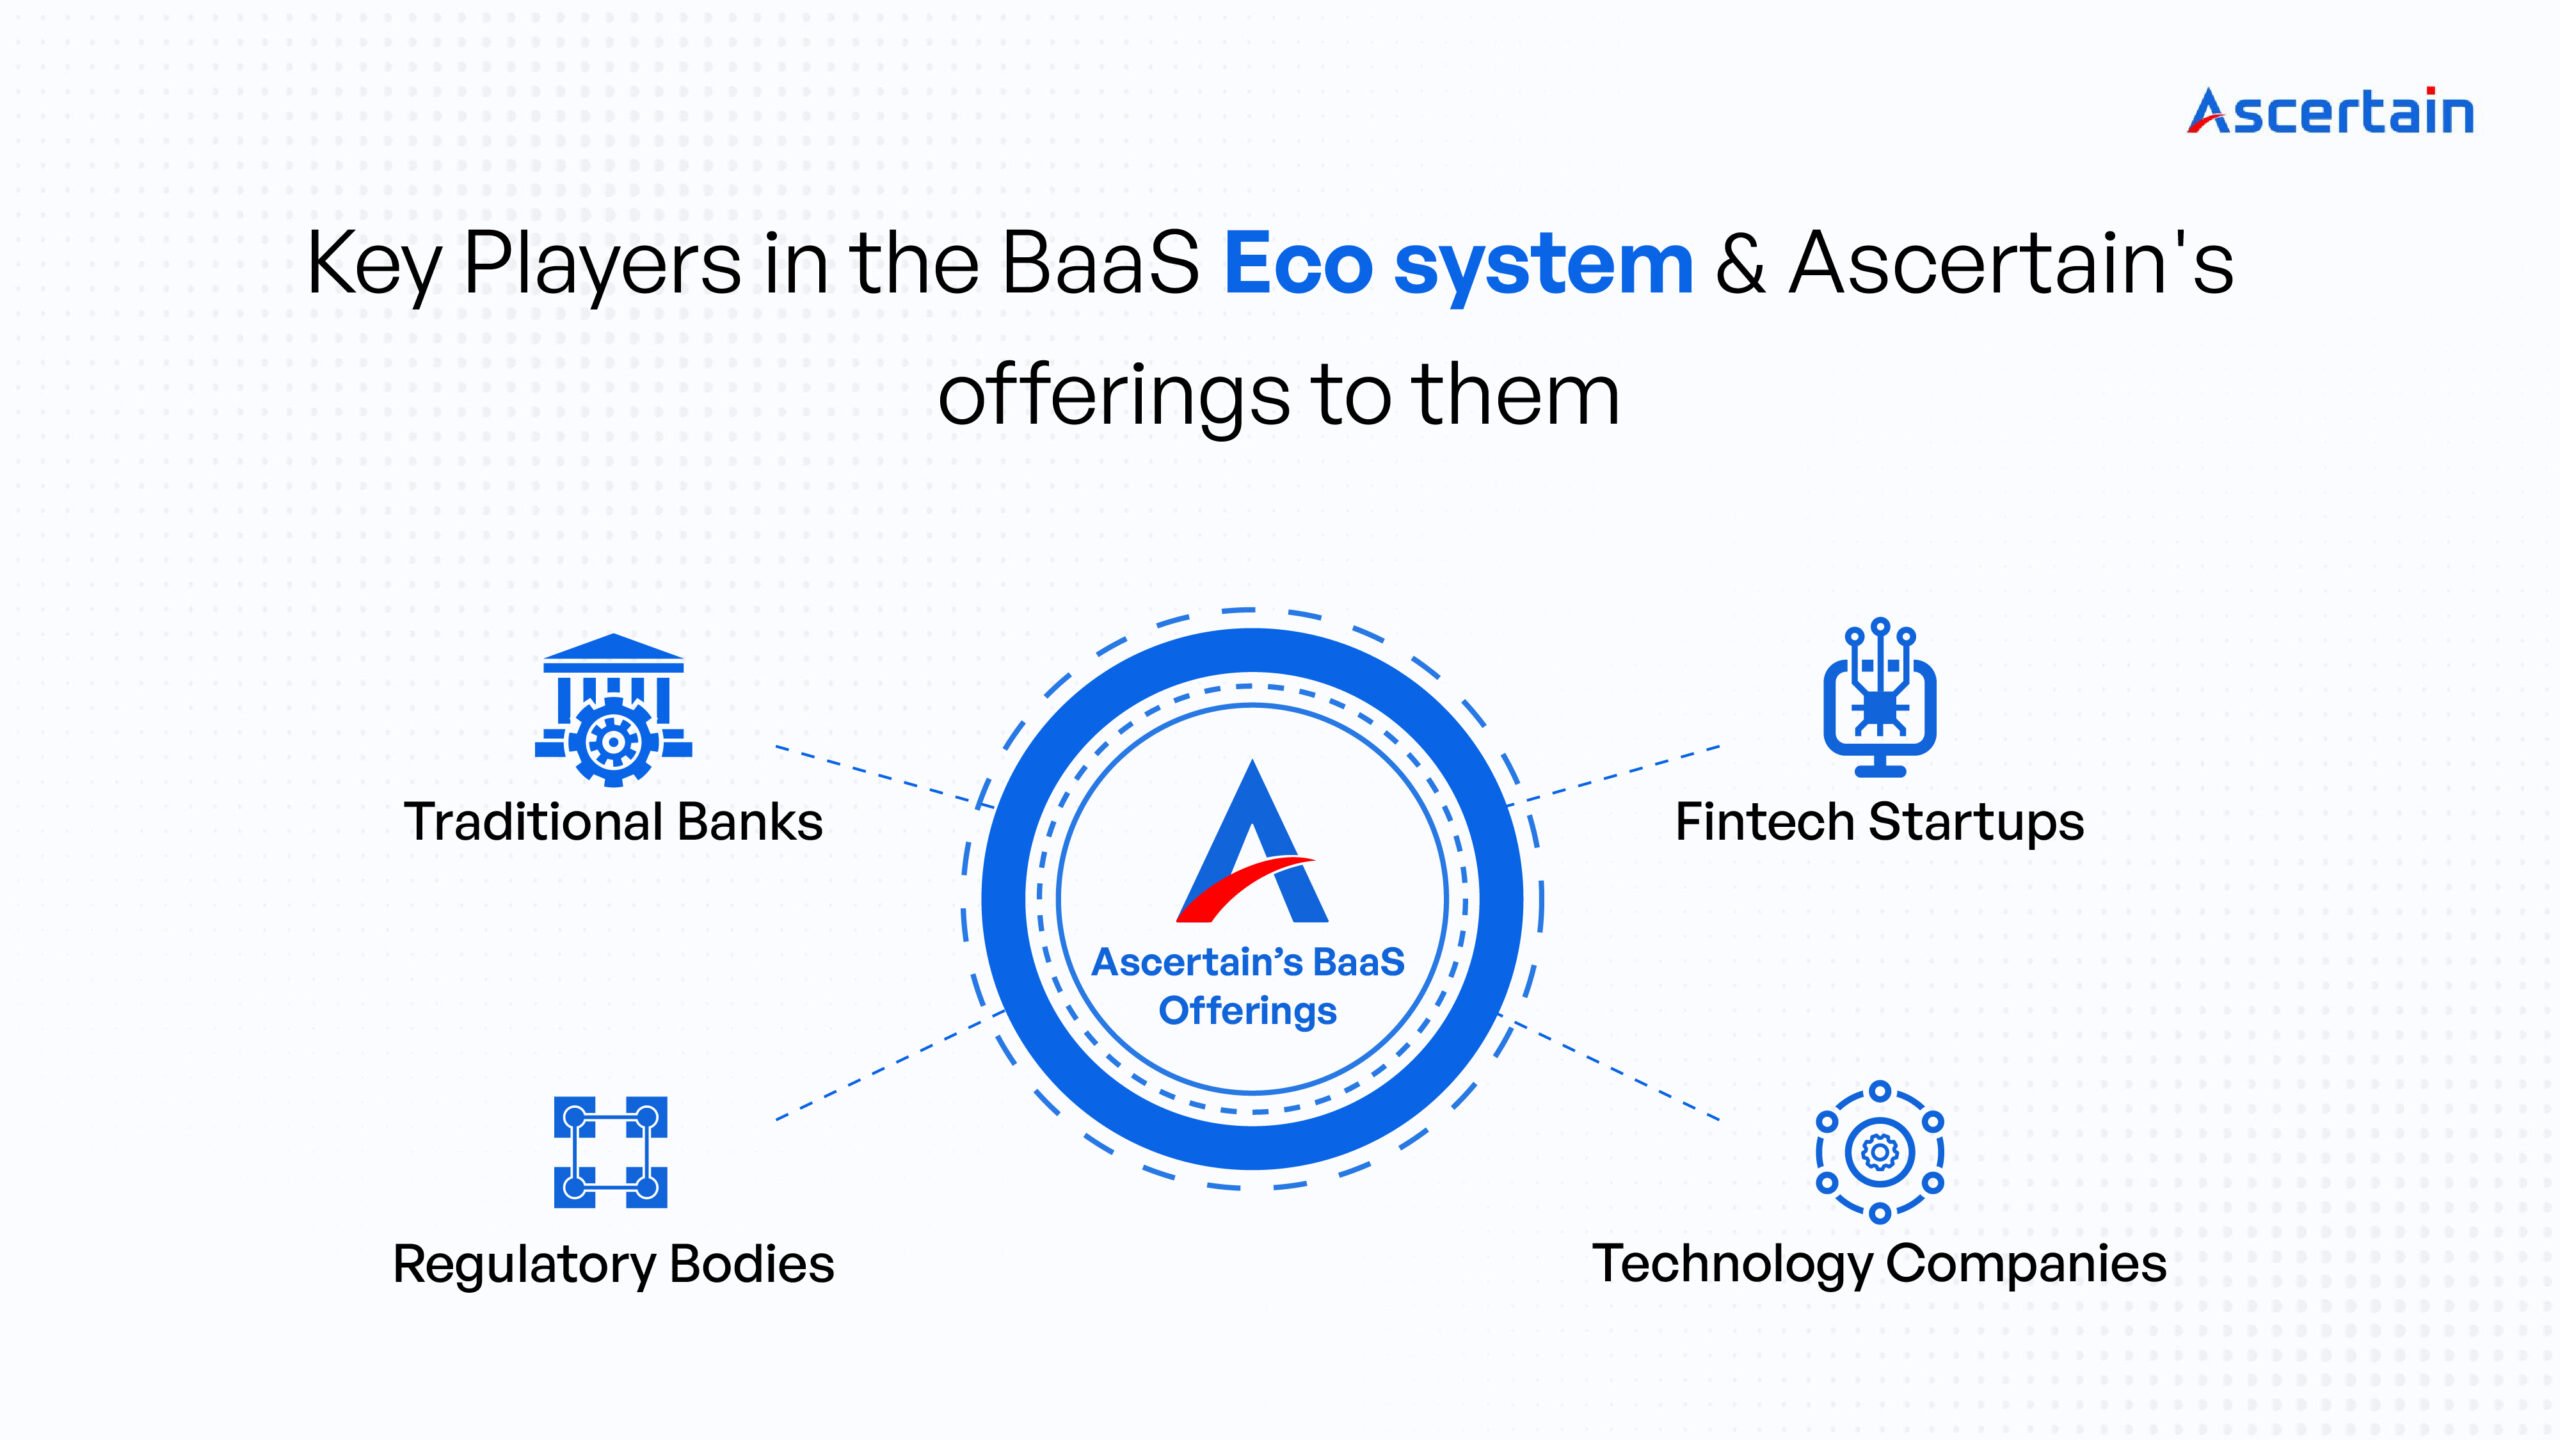 banking as a service - Ascertain [...]
</p>
</body></html>